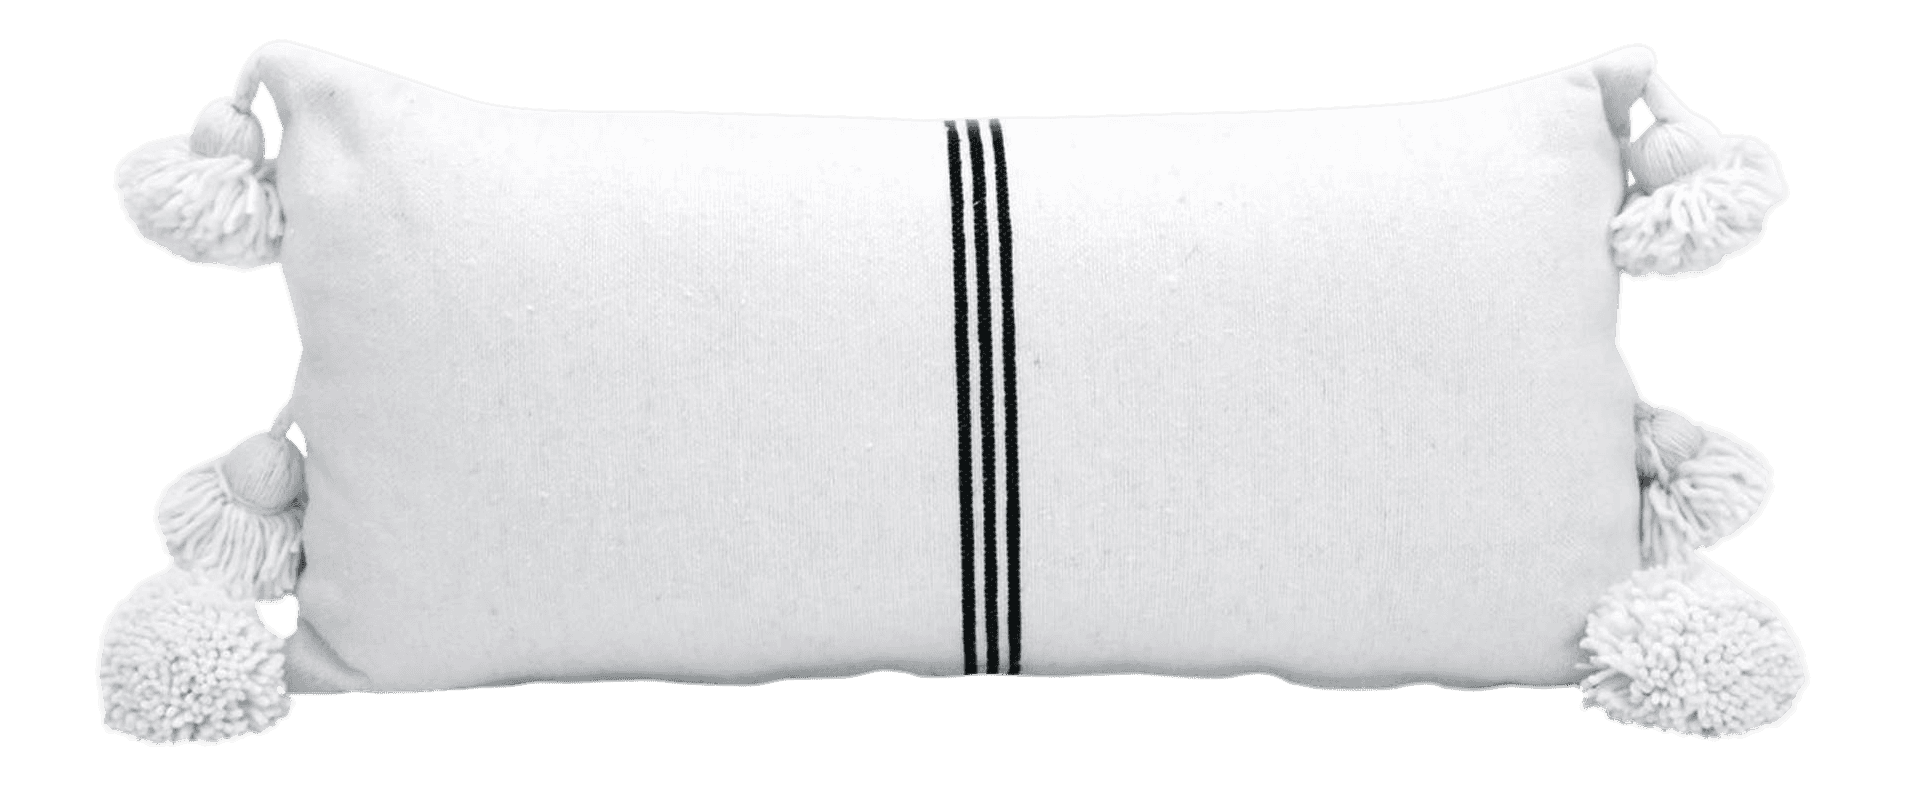 Moroccan PomPom Lumbar Pillow - Set of two - White with Black Pom Poms